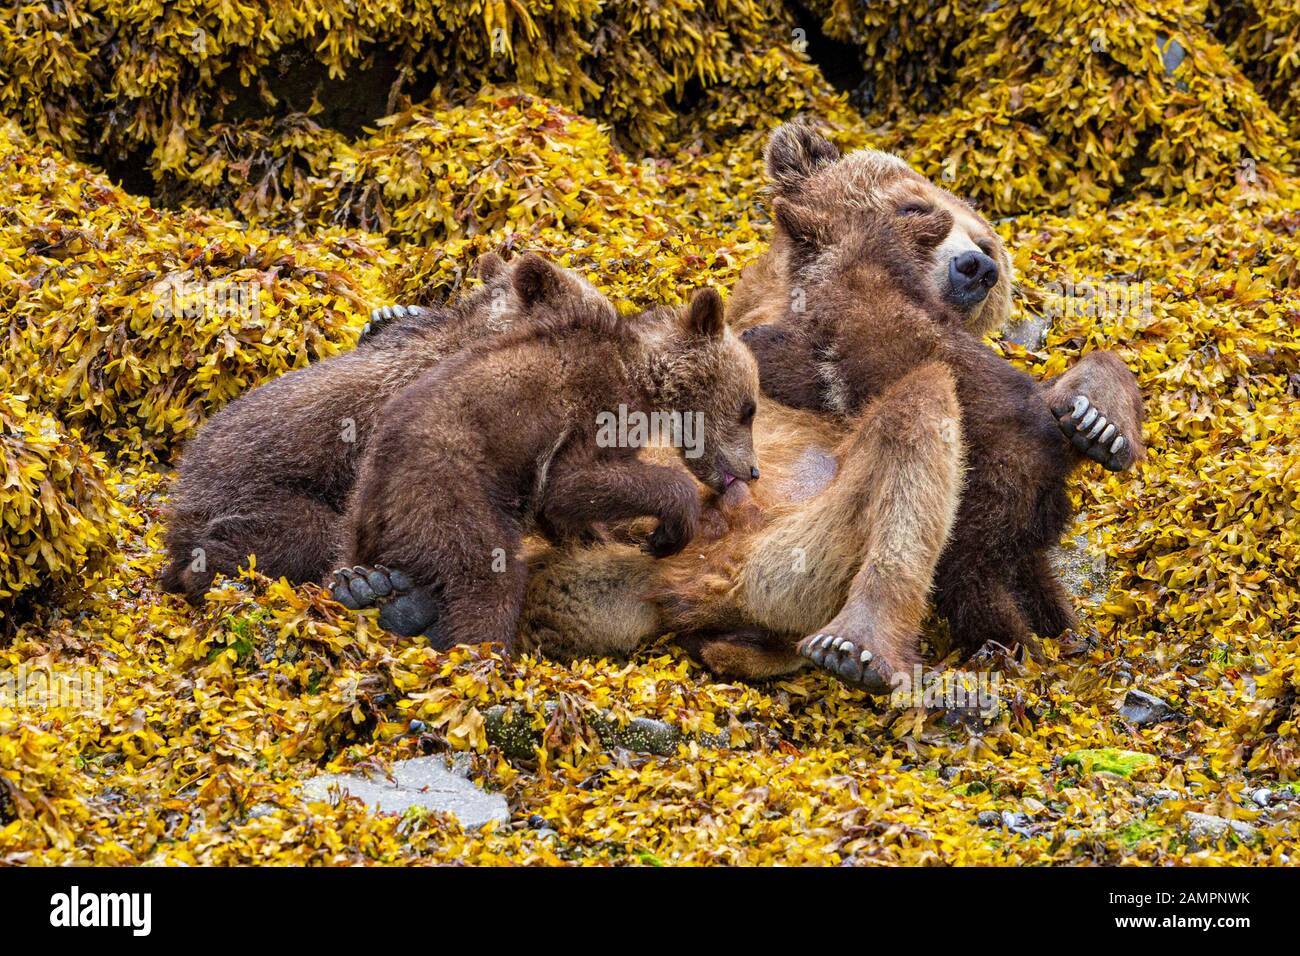 Grizzly bear mom nursing her cubs during low tide in seaweed along the Knight Inlet shore, First Nations Territory, British Columbia, Canada. Stock Photo